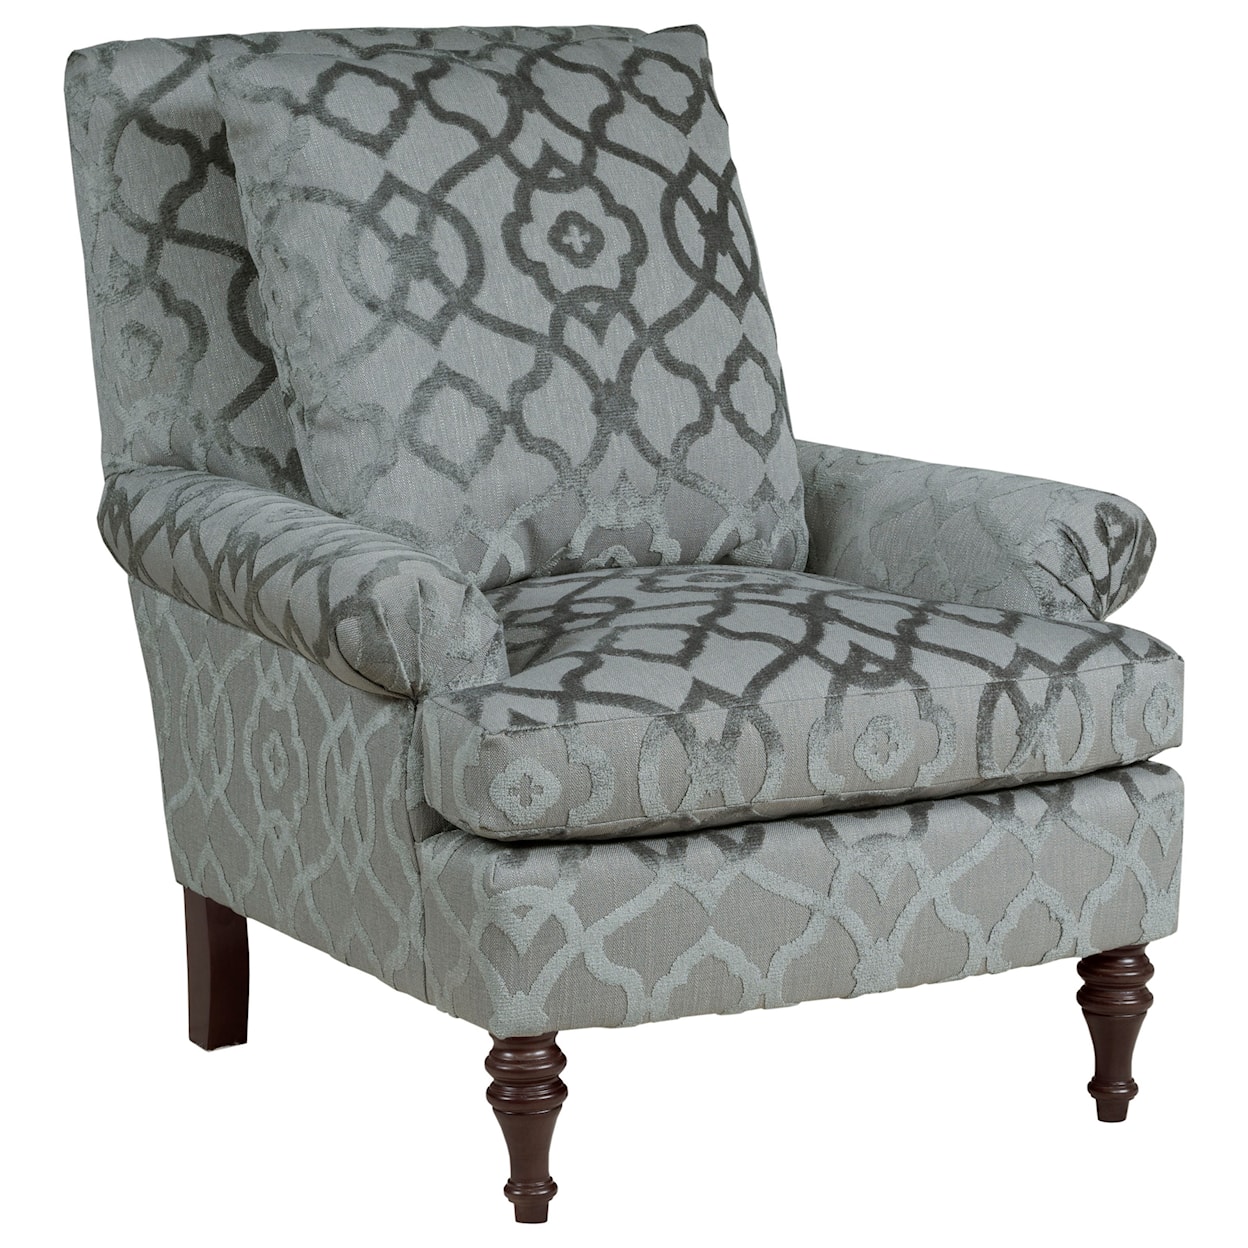 Kincaid Furniture Accent Chairs Holden Chair